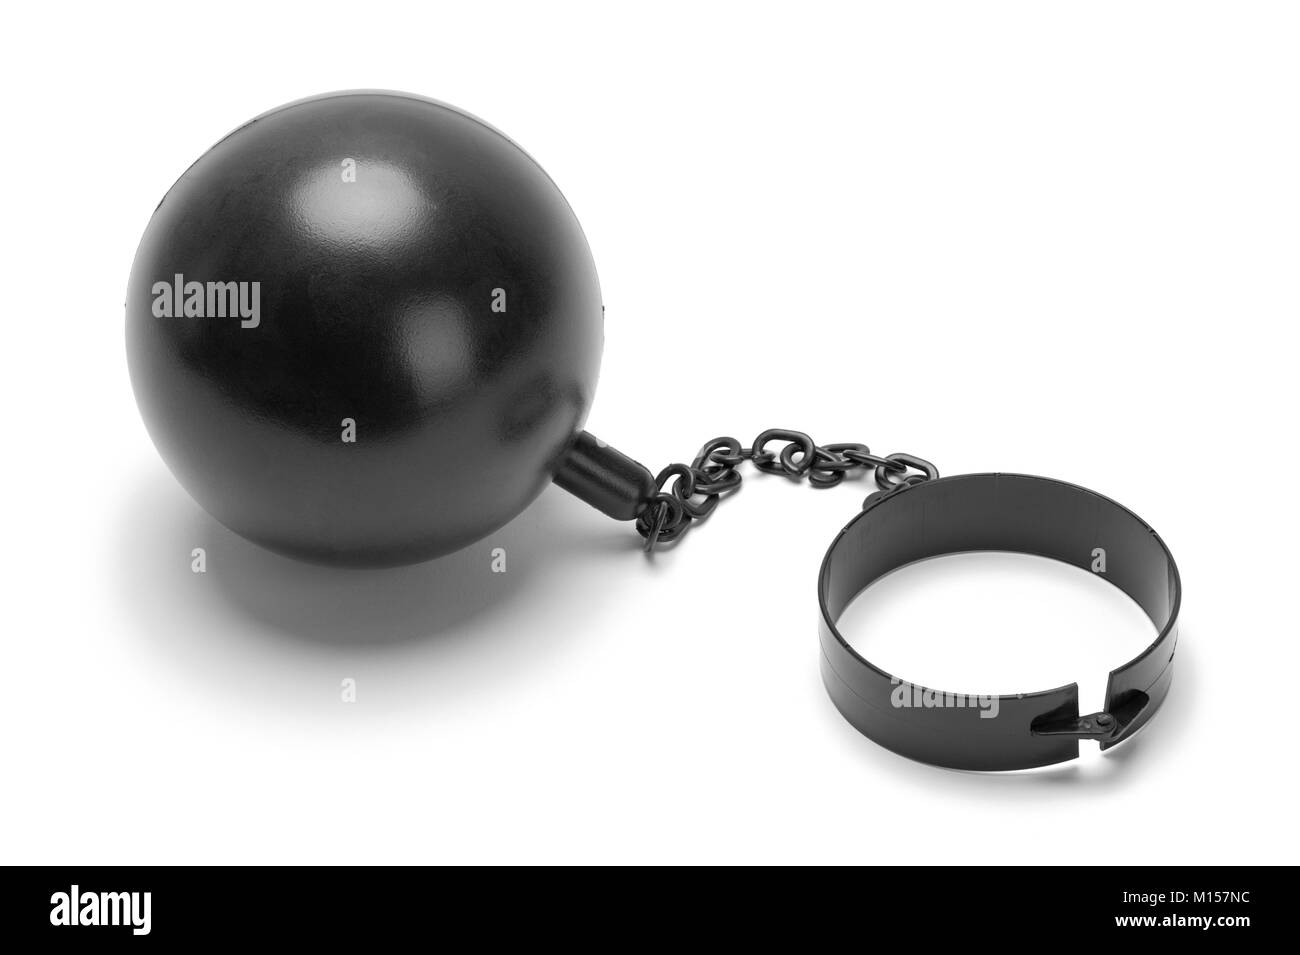 Man breaking free from ball and chain, illustration - Stock Image -  C039/7920 - Science Photo Library